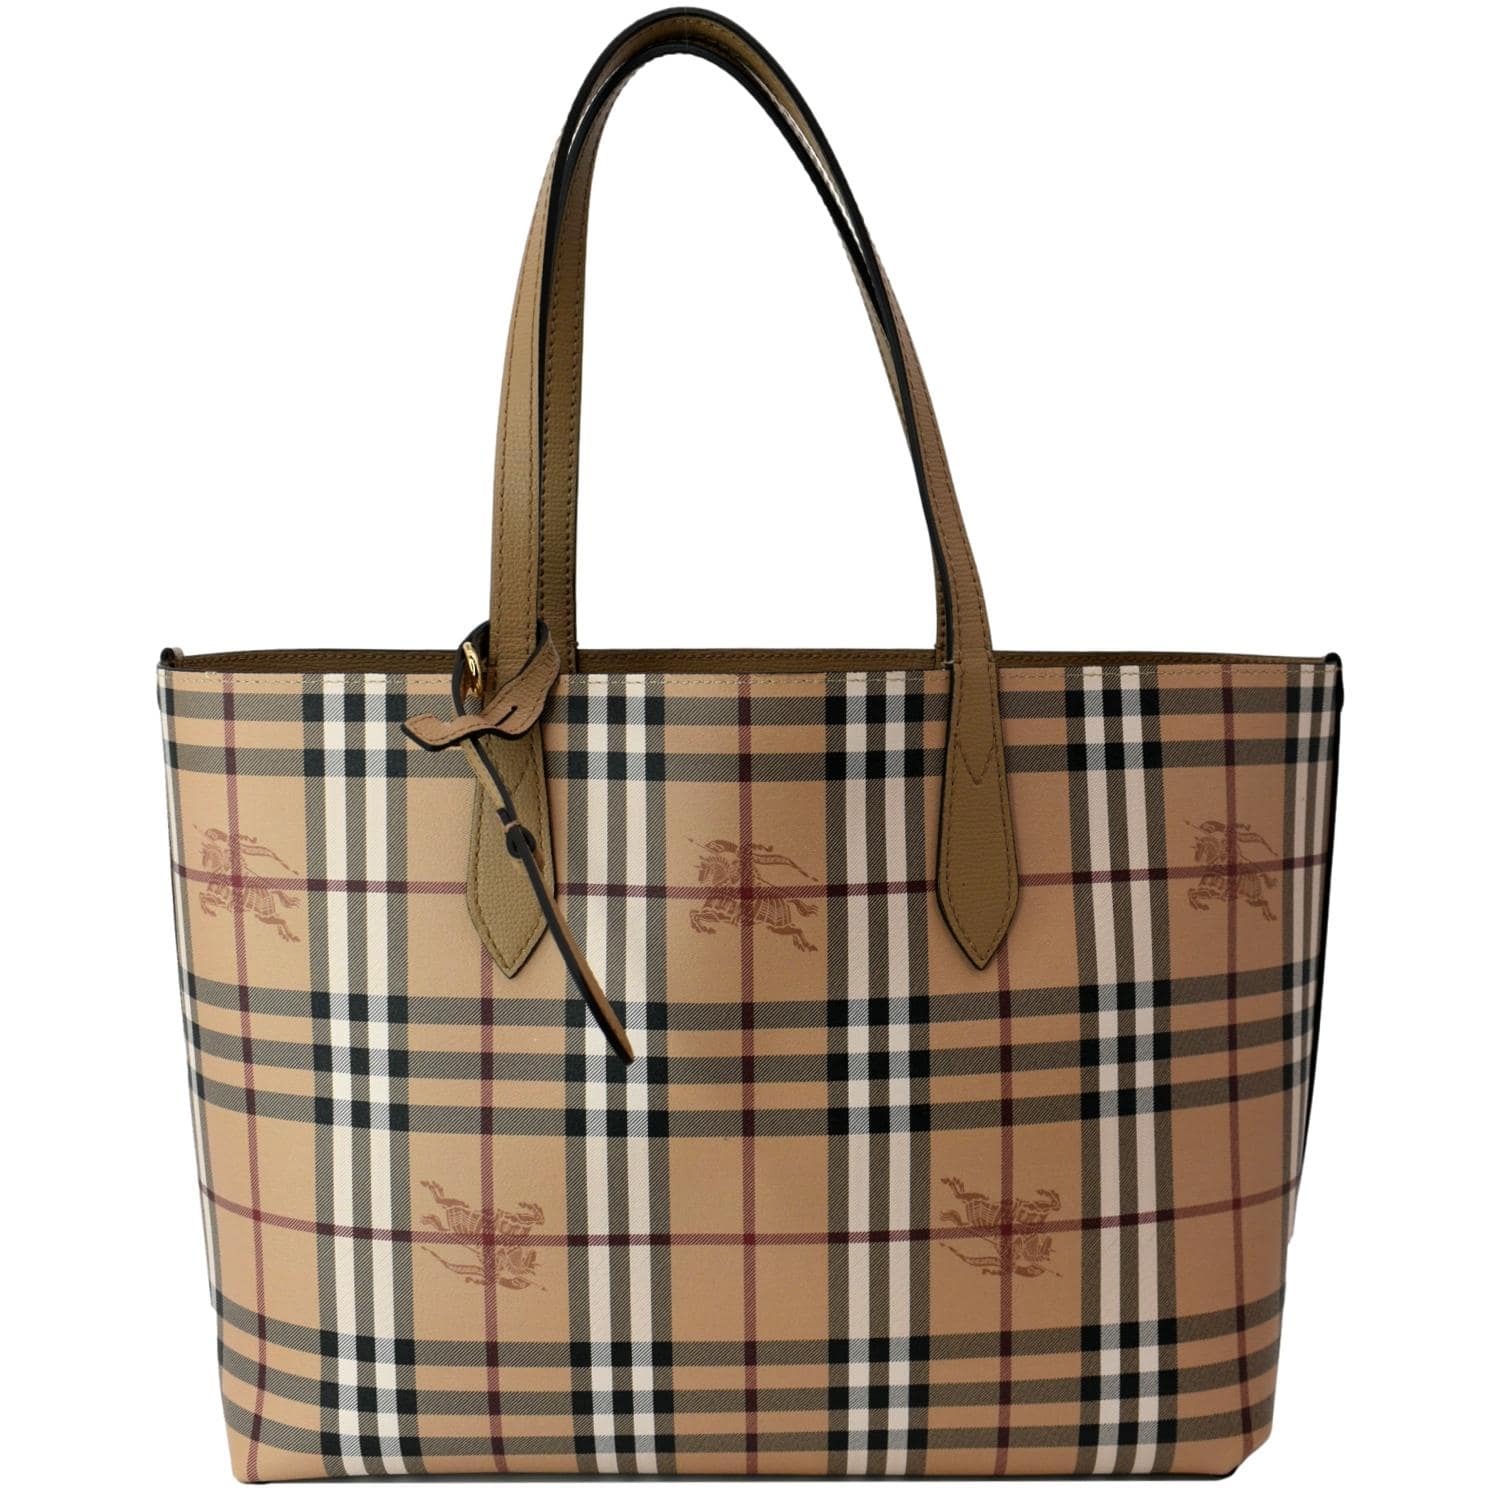 Burberry Tote Bag - How to wear Designer Consignment